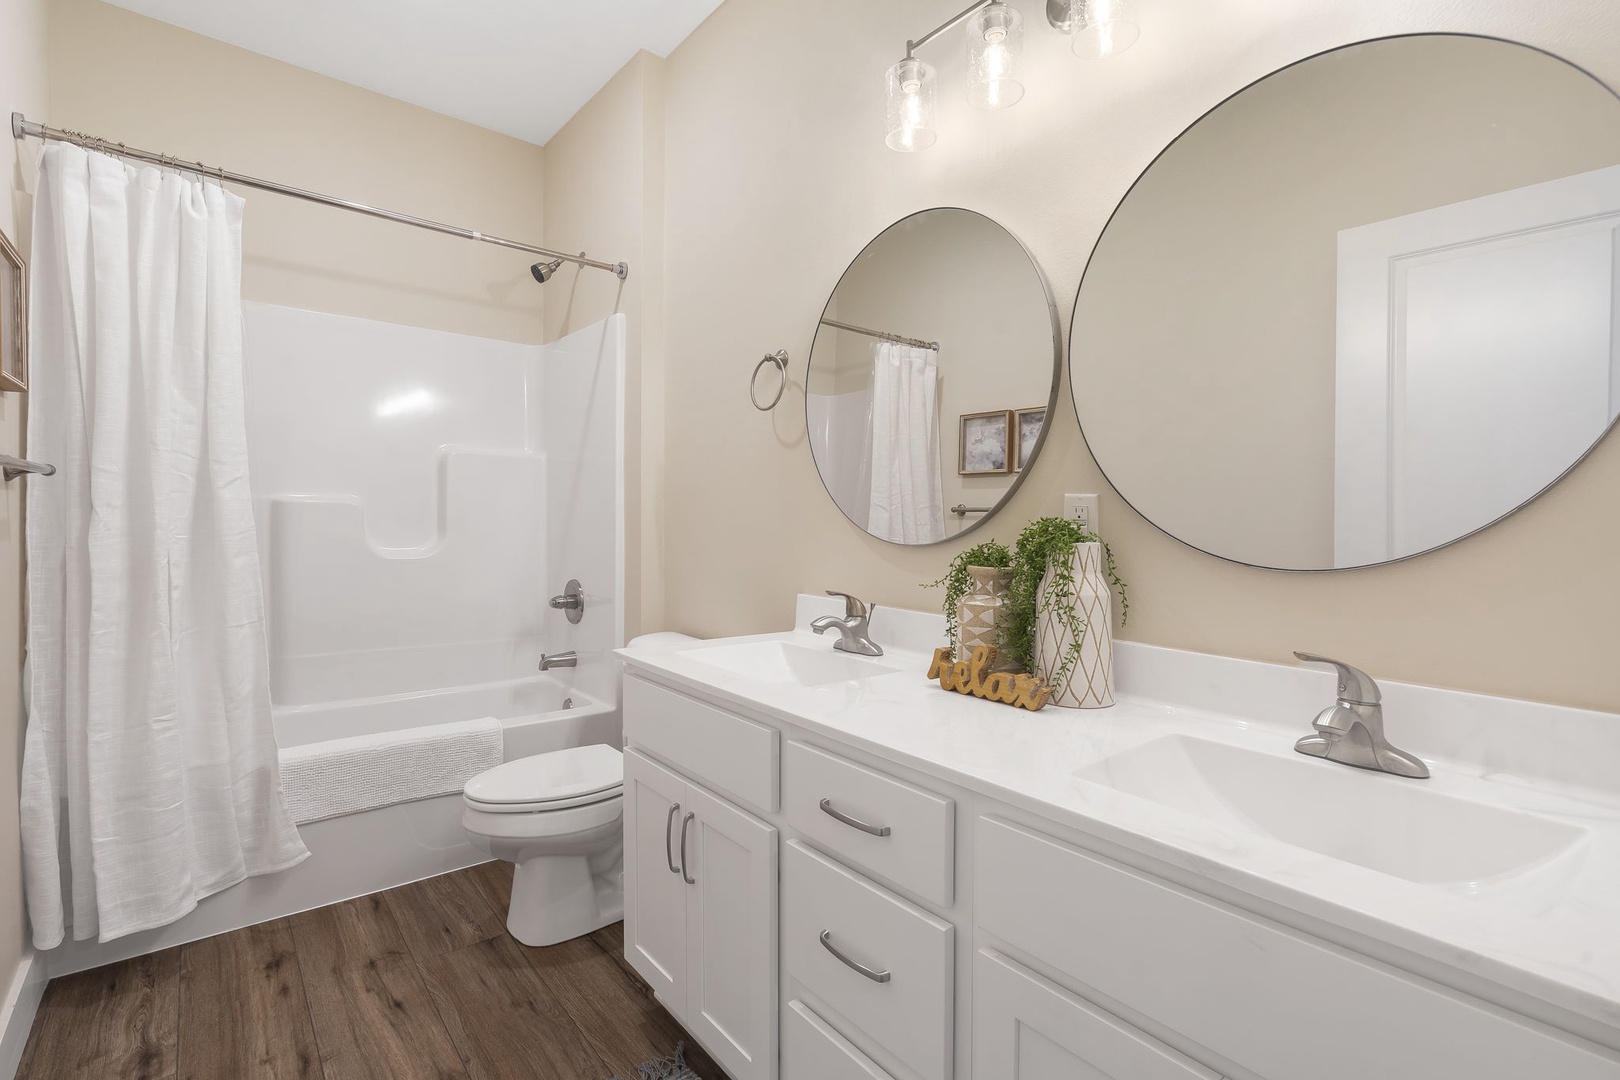 The hall Bathroom offers a spacious Double Vanity and Shower/Tub Combo